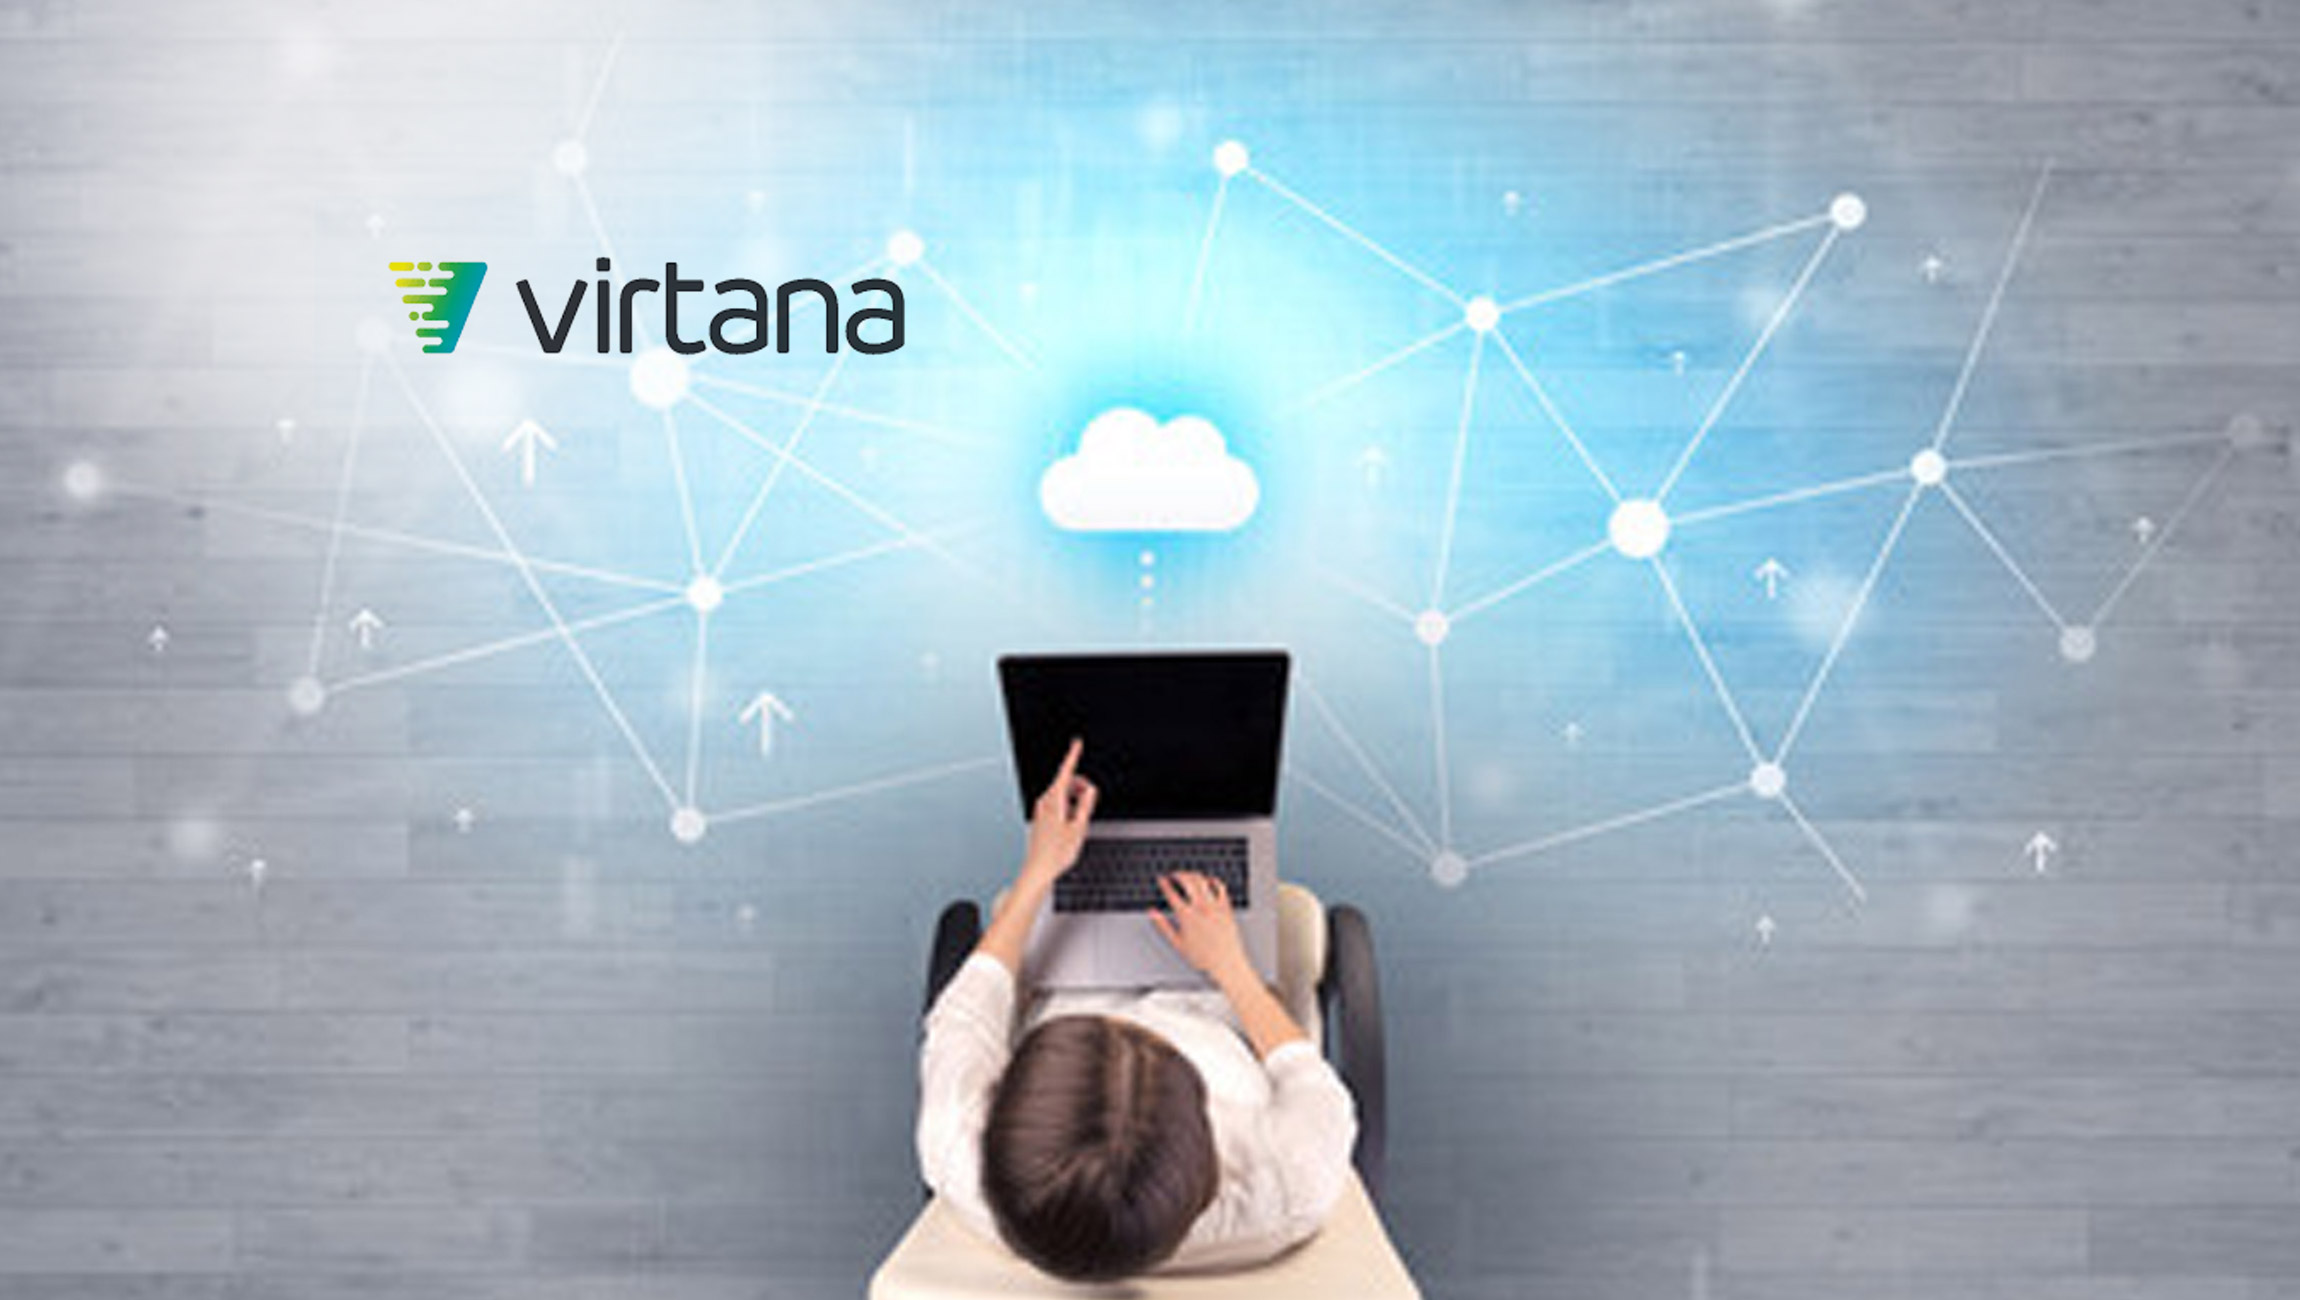 Virtana-Research-Finds-More-Than-80%-of-Enterprises-Have-a-Multi-Cloud-Strategy-and-78%-Are-Using-More-Than-Three-Public-Clouds